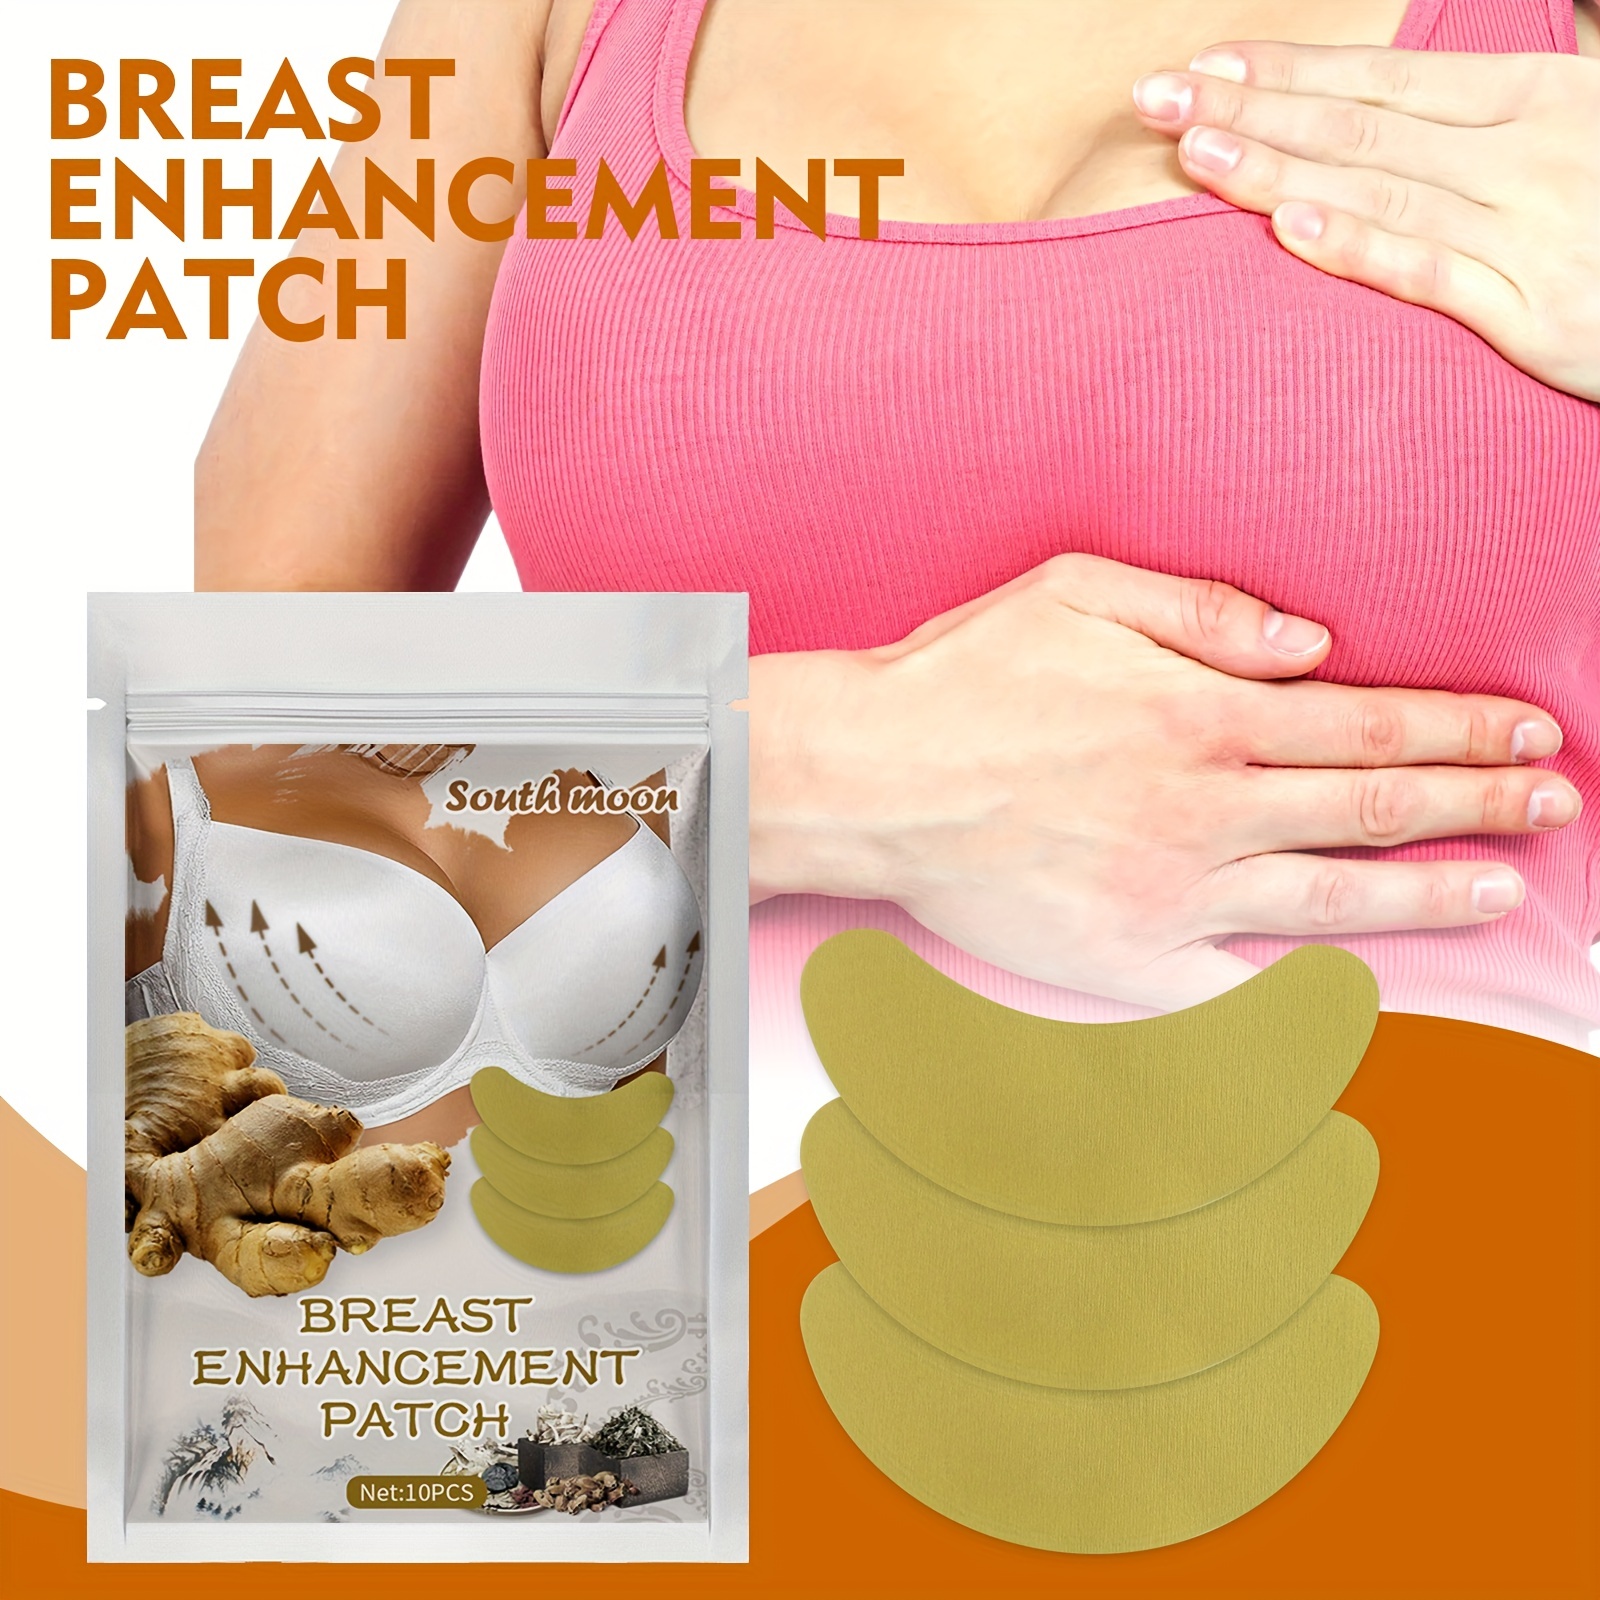 10pcs Ginger Bust Enhancement Patch, Ginger Breast Enlargement Patch,  Breast Enlargement Firming Lifting Care Patch